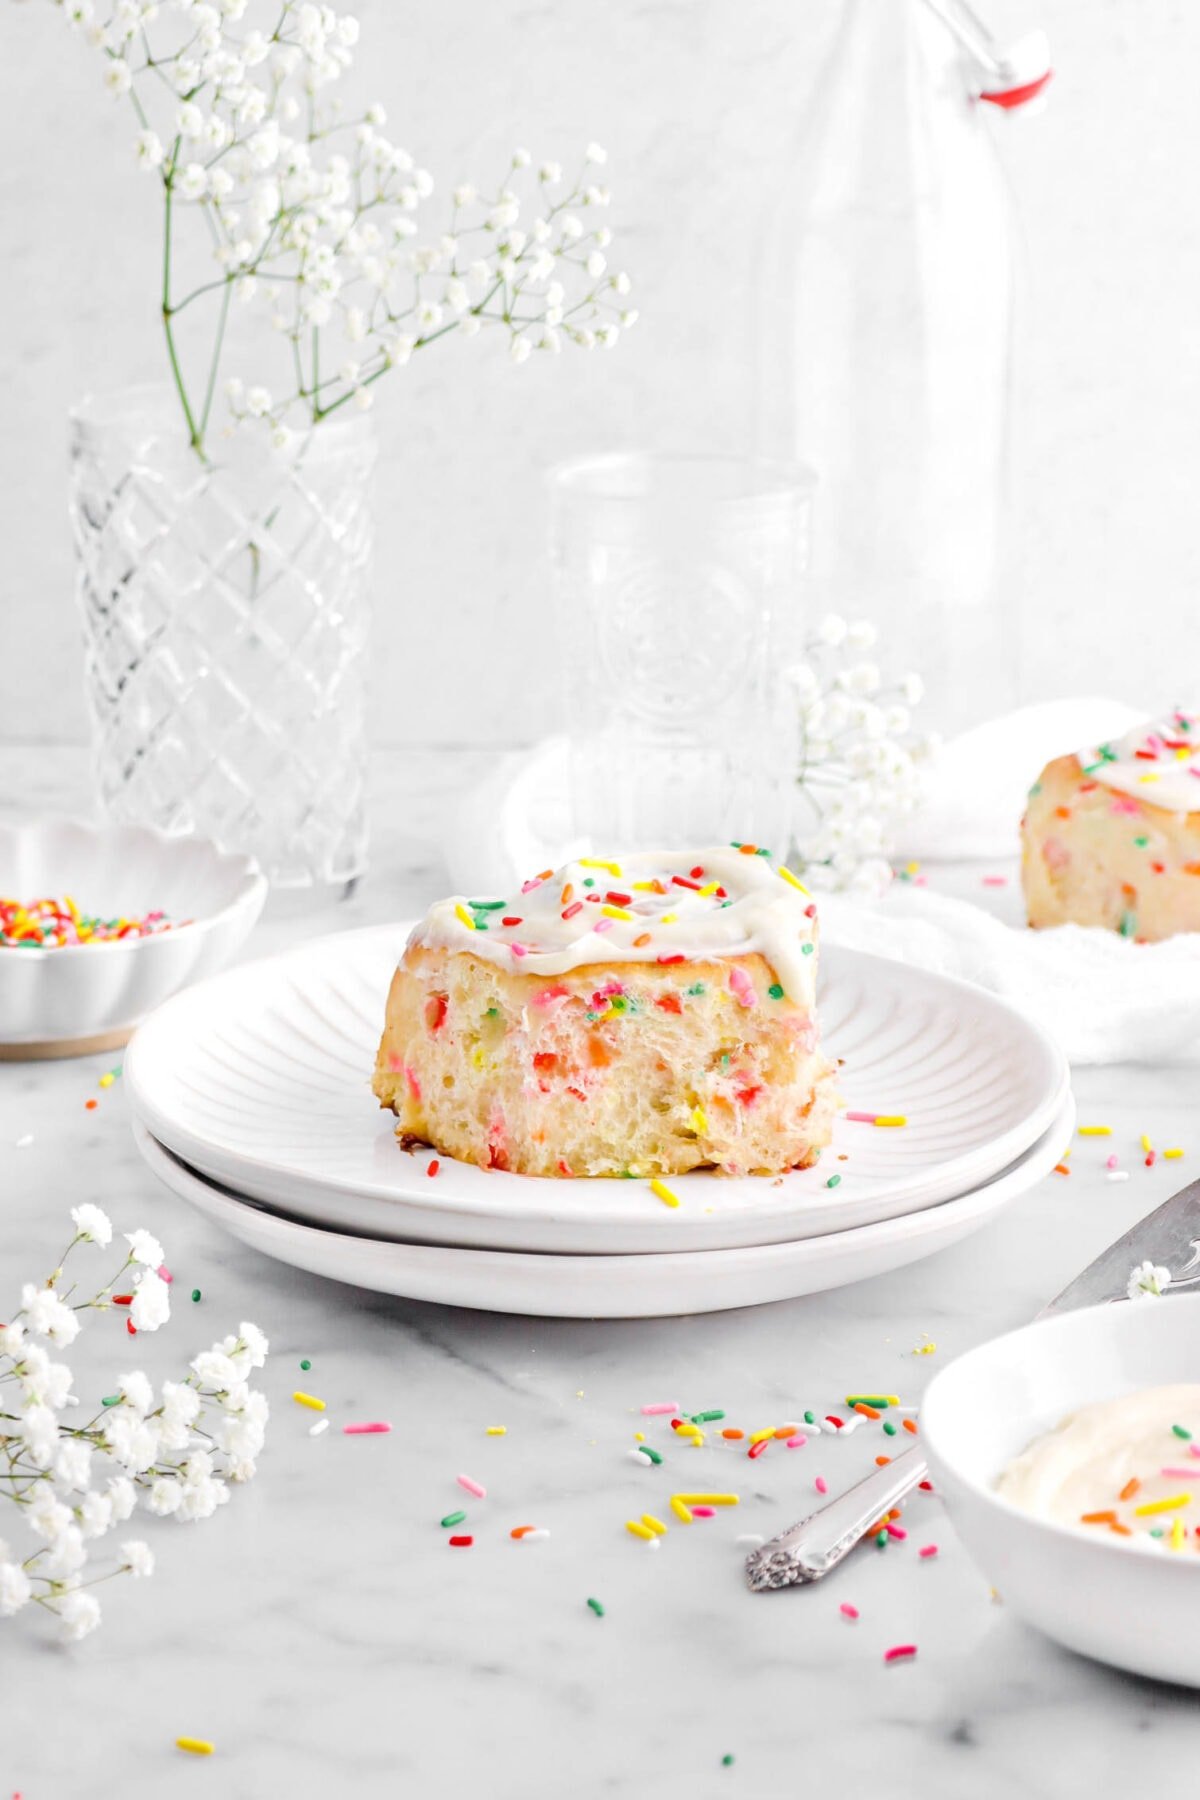 frosted funfetti cinnamon roll on stack of two plates with sprinkles and white flowers around, a white cheese cloth, empty glasses, and another cinnamon roll behind.